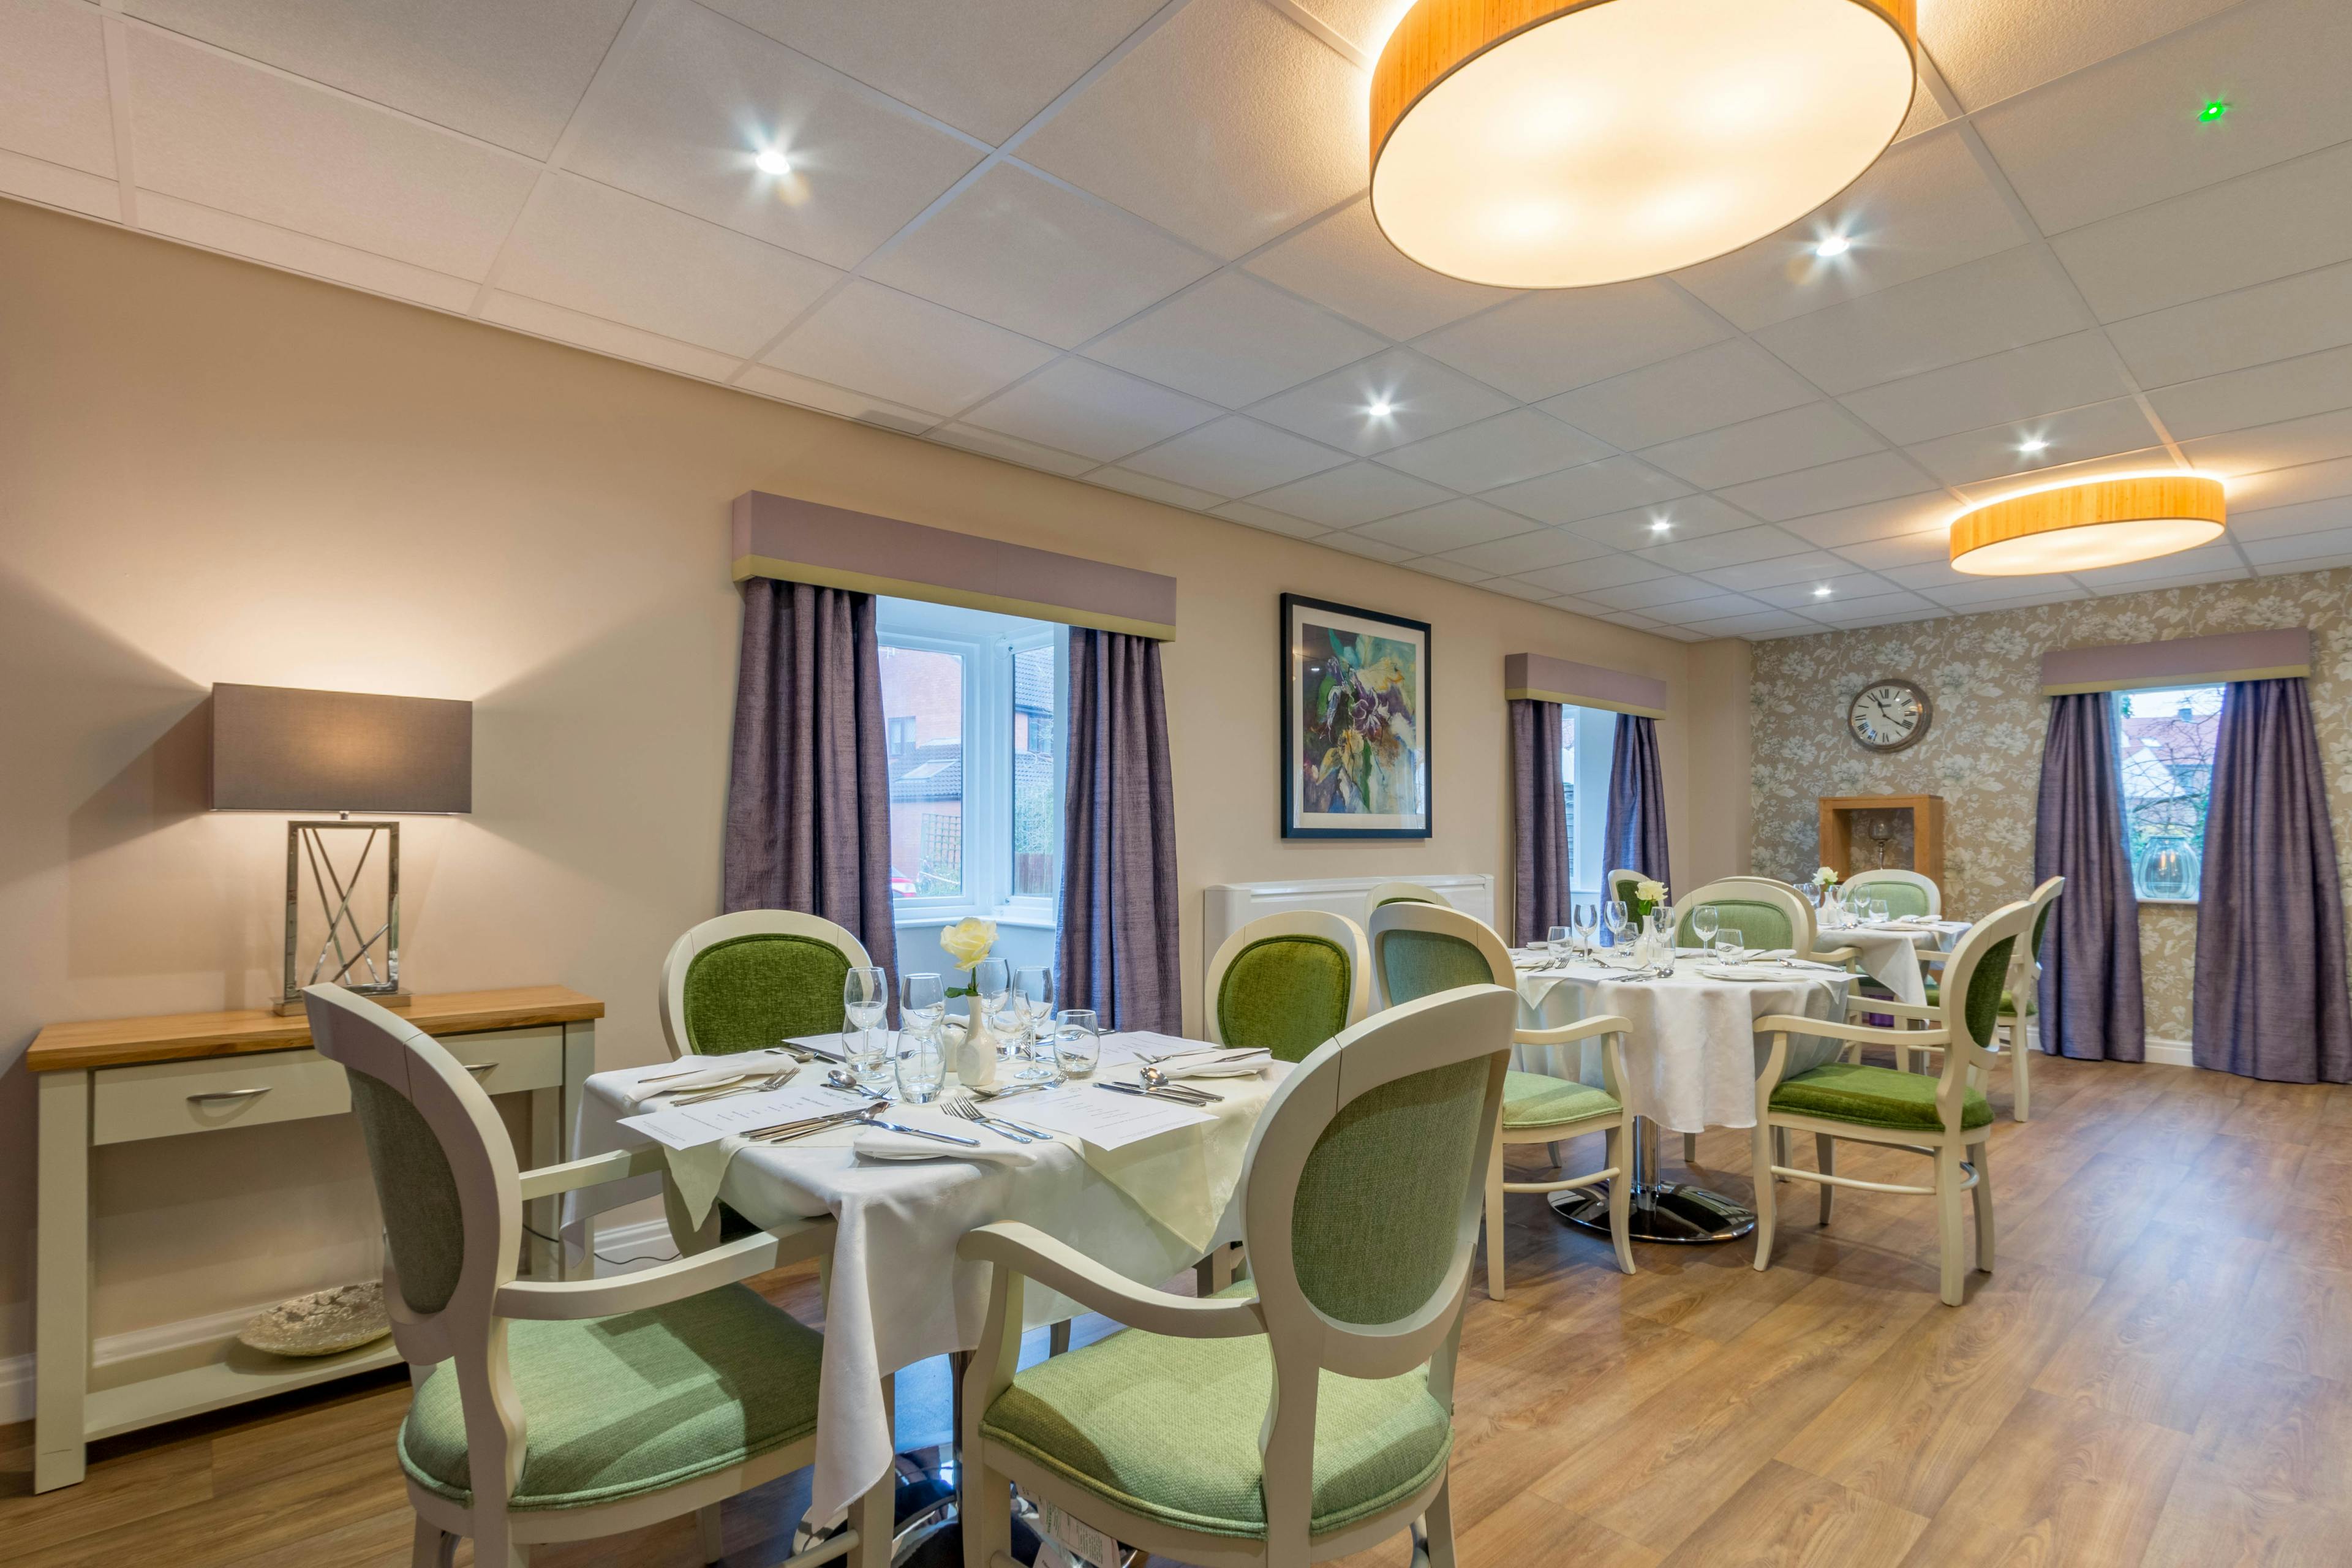 Dining Room at Meadowbeck Care Home in York, North Yorkshire